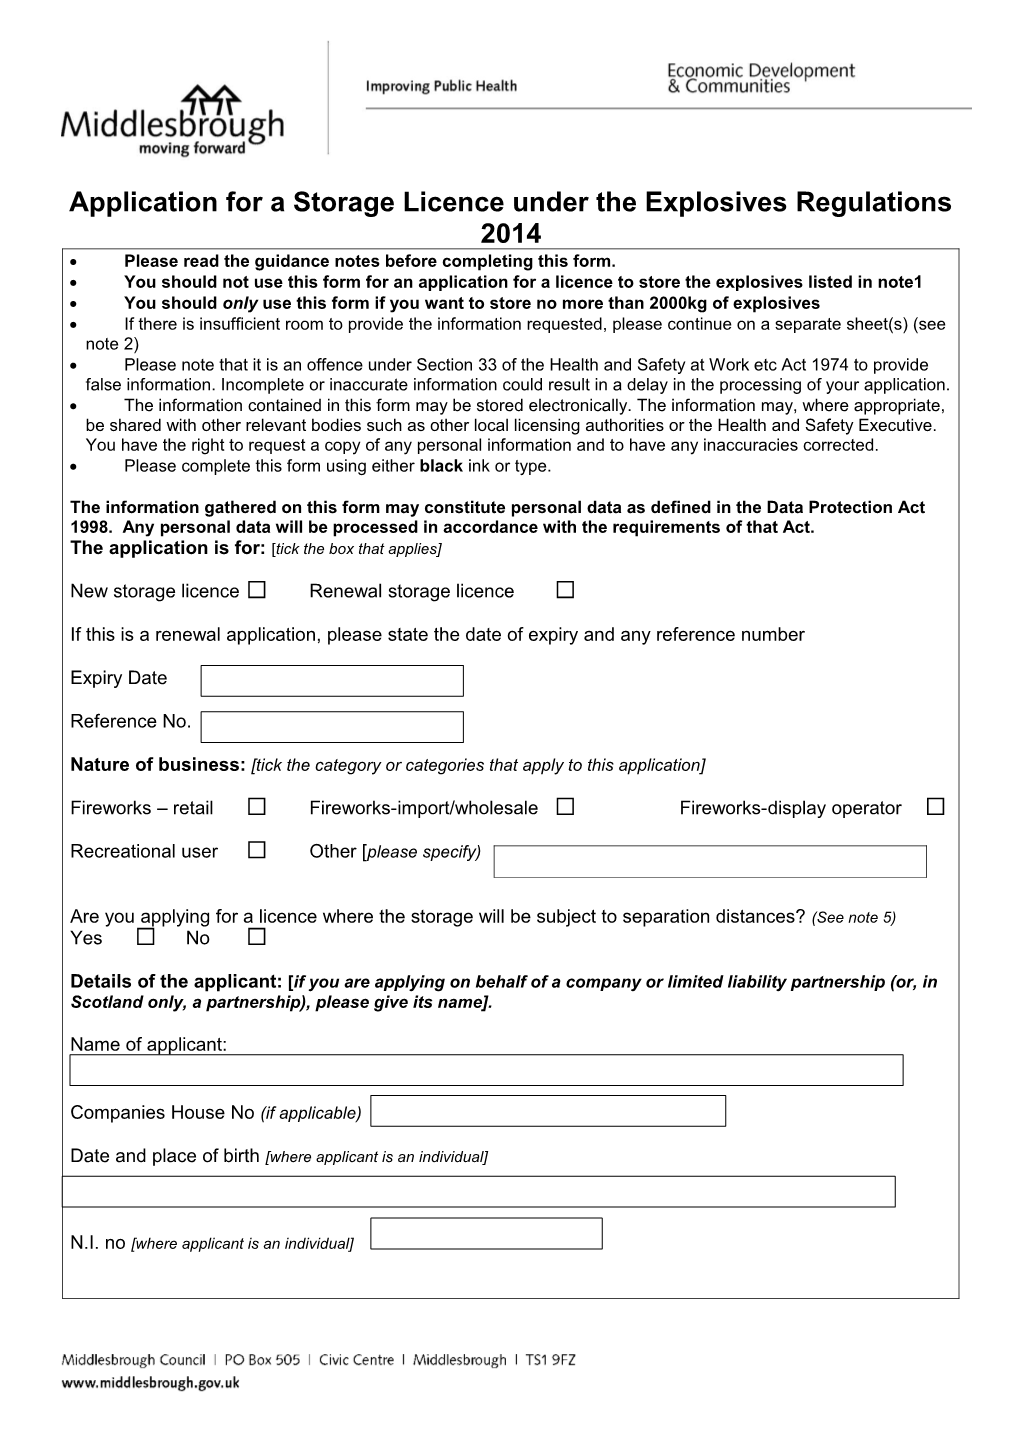 Application for a Storage Licence Under the Explosives Regulations 2014